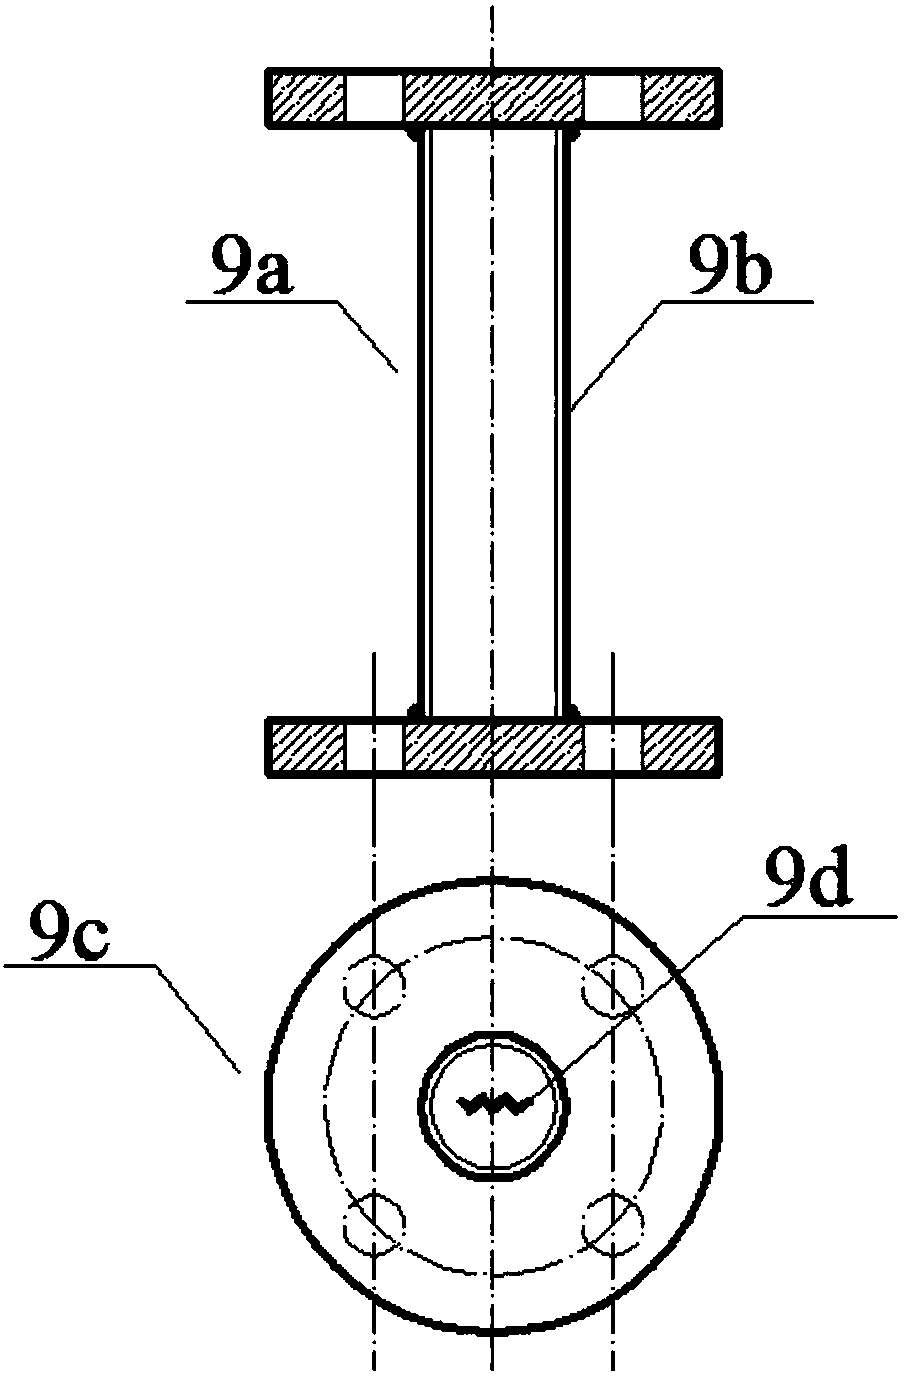 Experimental device and method for liquid phase pipeline leaking irregular holes equivalent to round holes